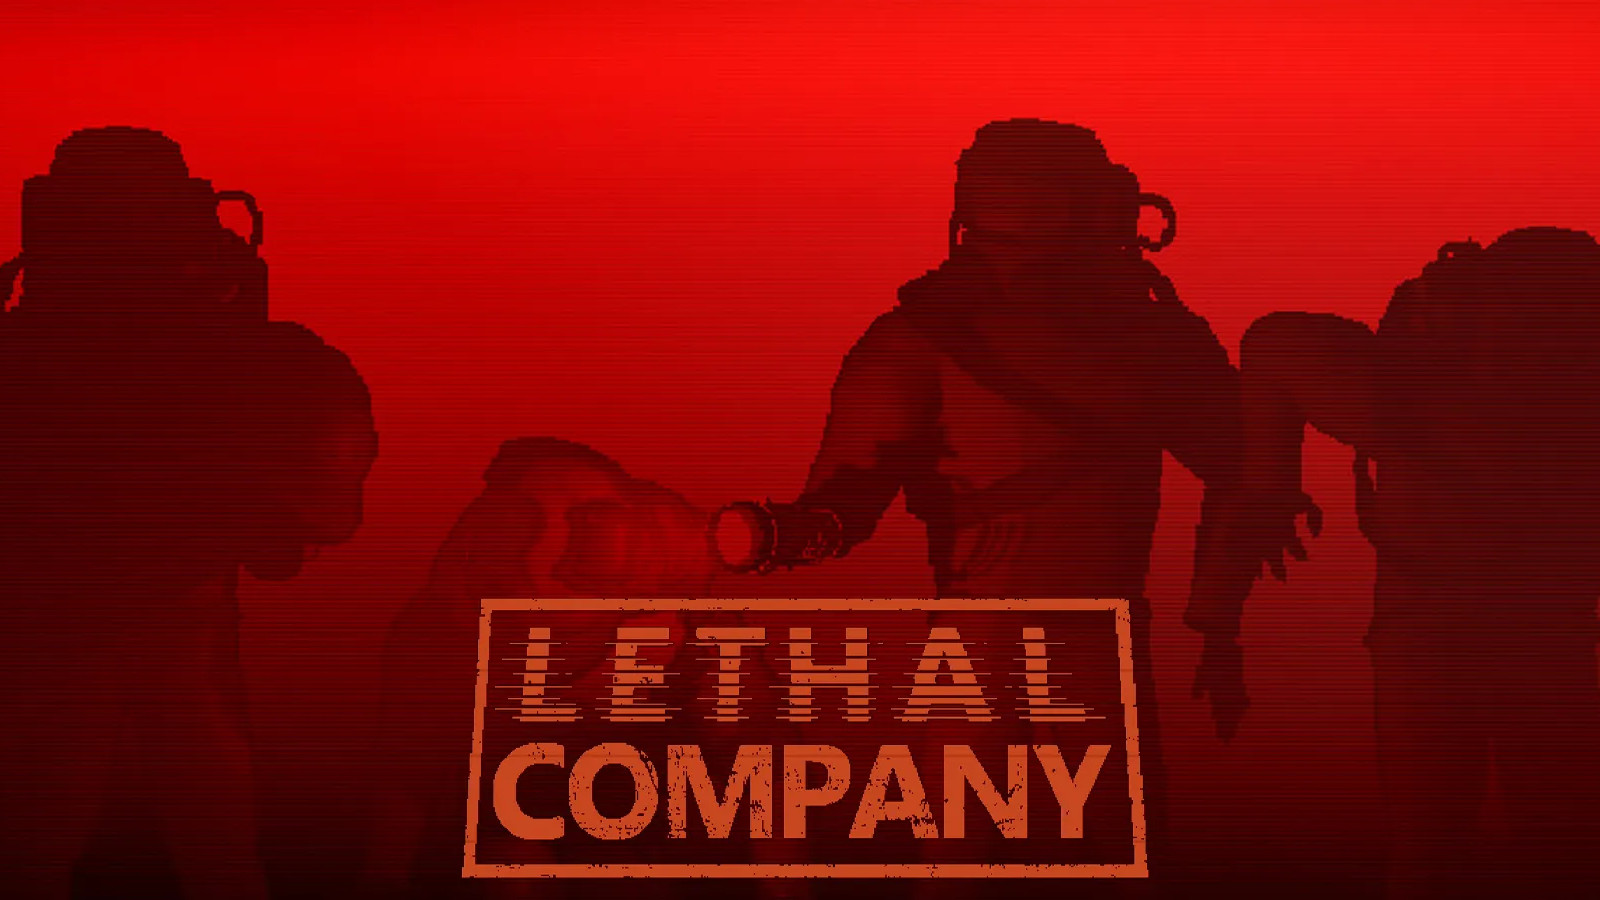 Lethal Company has become one of Steam’s most popular games amid viral success